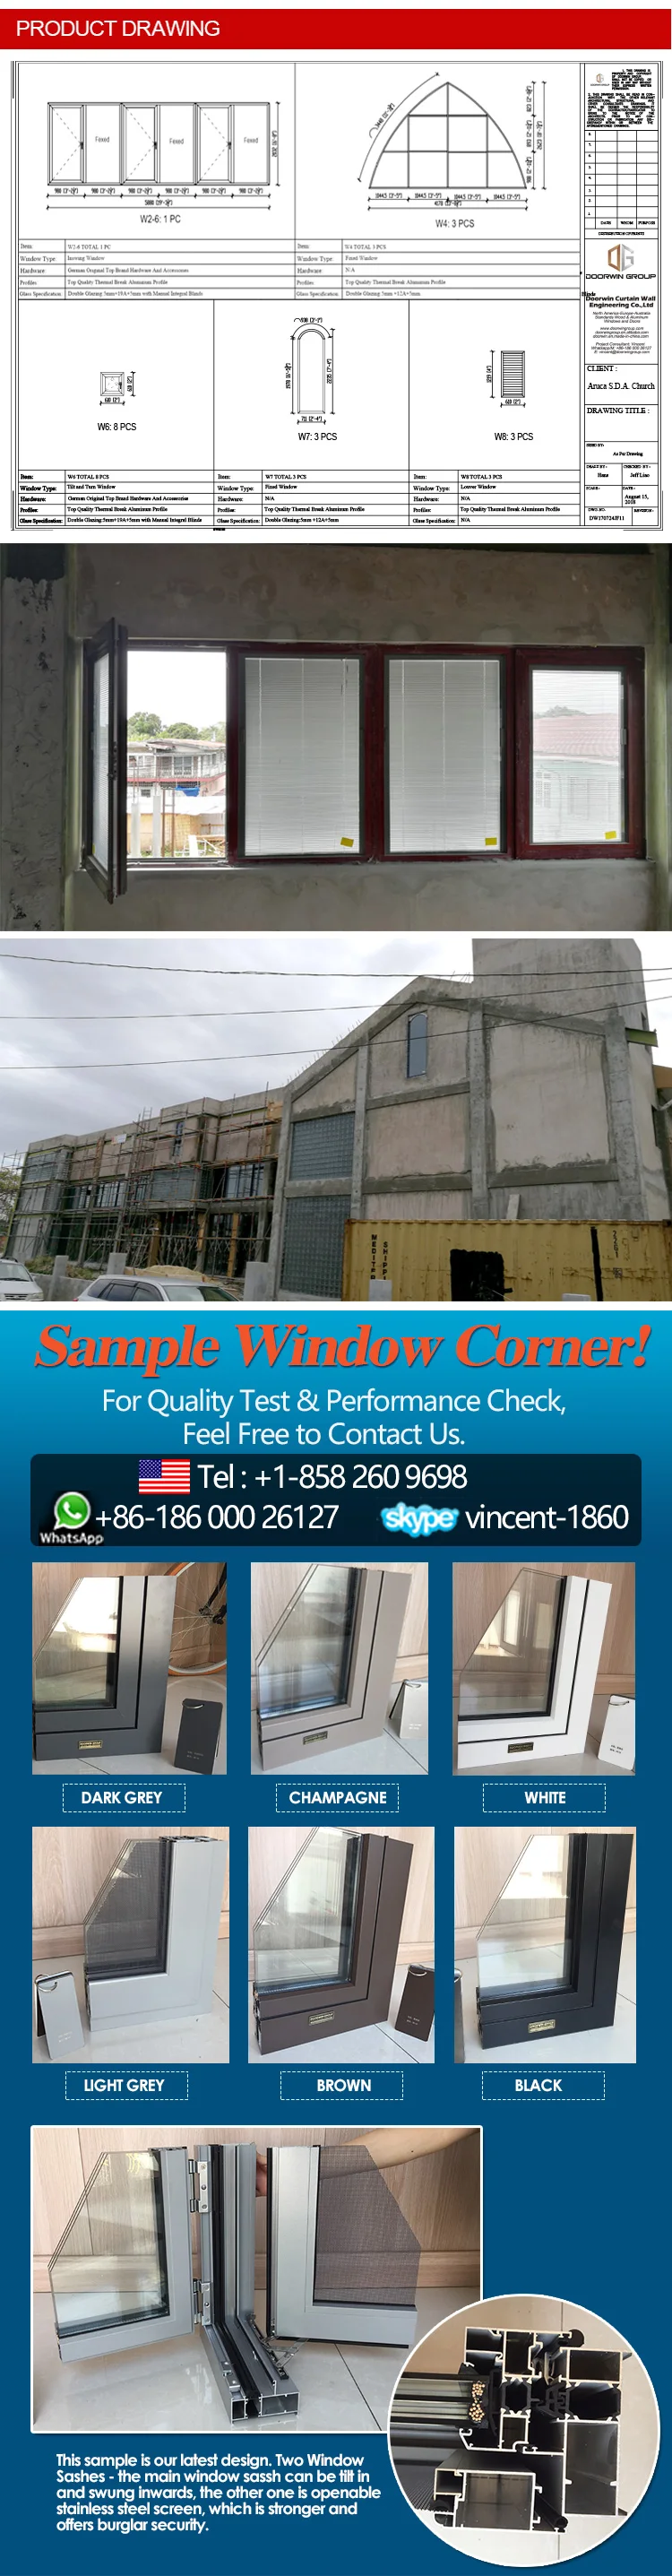 China factory supplied top quality energy efficient windows for sale depot & home cost comparison